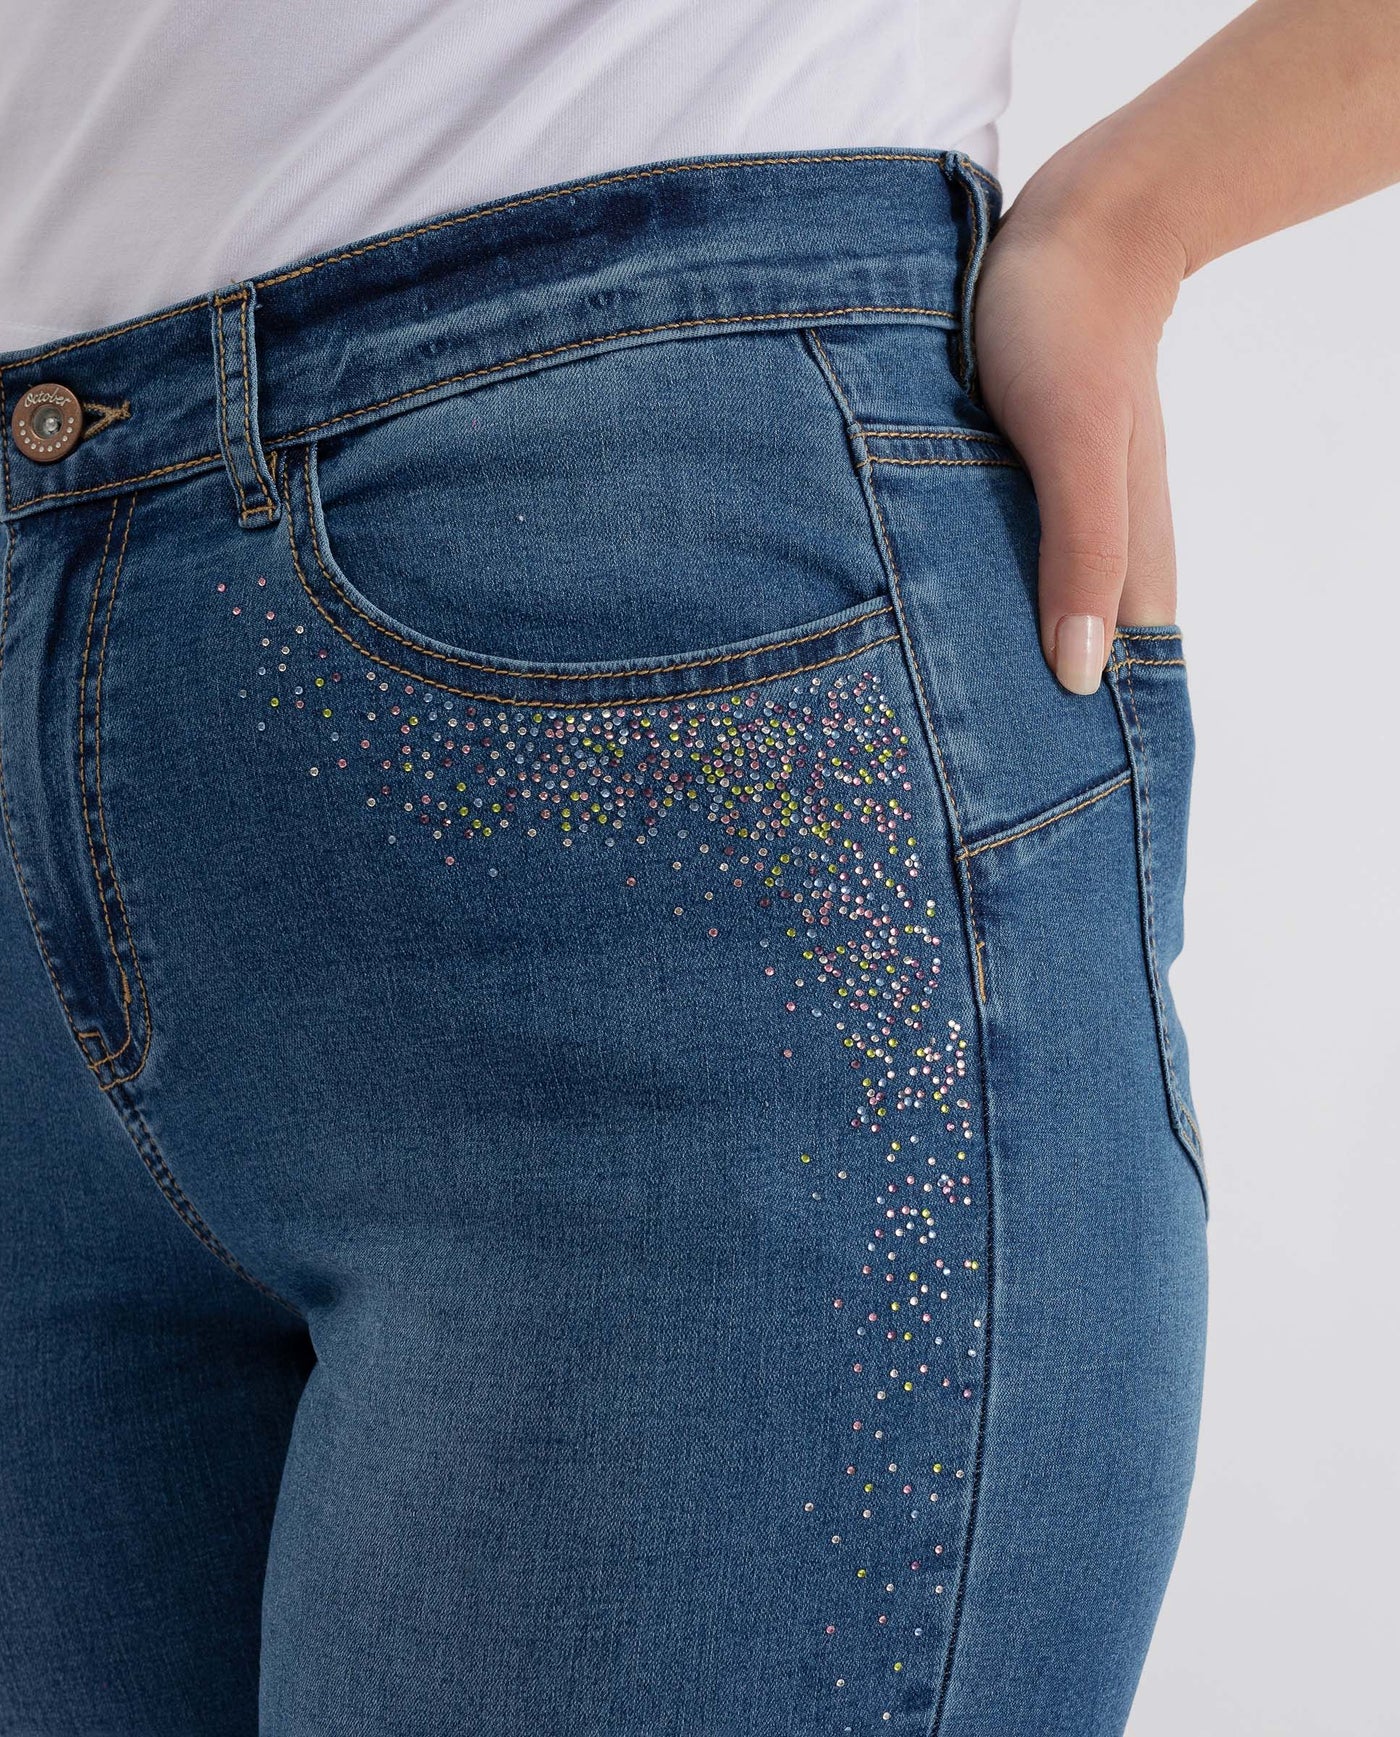 JEANS PANTS WITH DARK BLUE COLORS WITH STRASS DETAILS